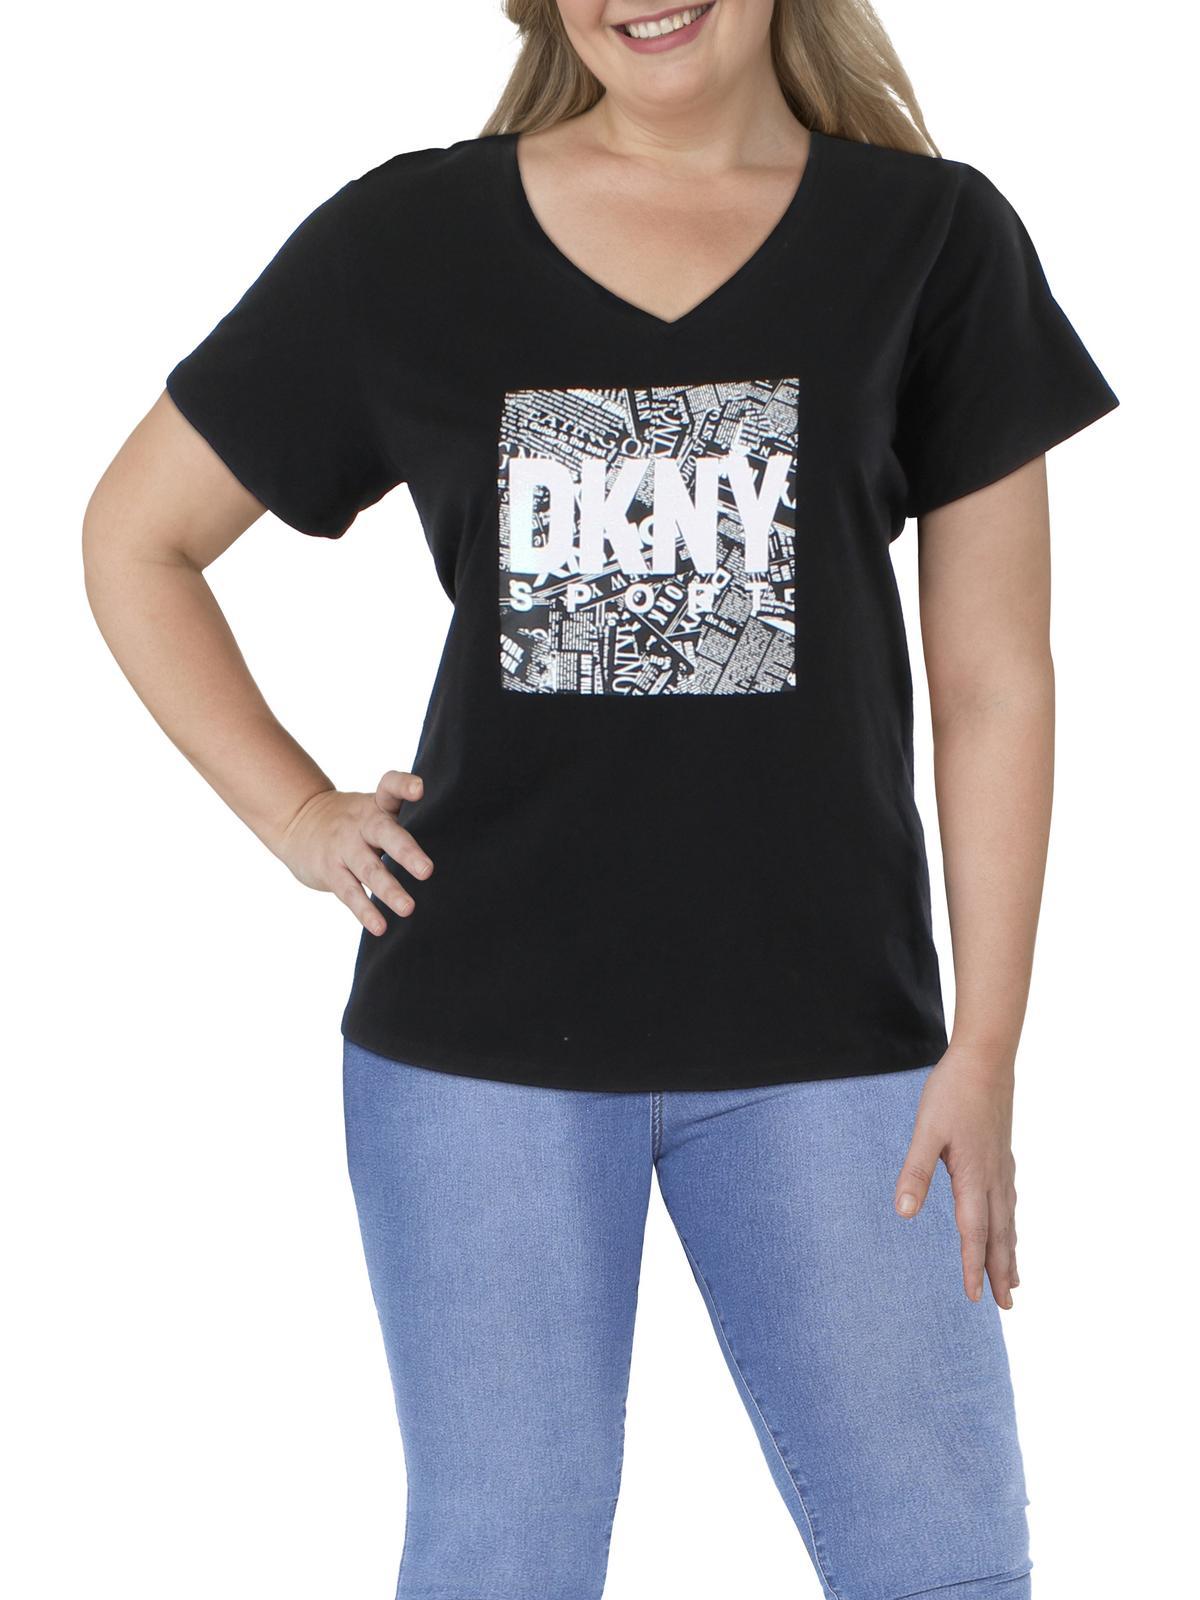 DKNY Printed Stretch V-neck Graphic T-shirt in Black | Lyst